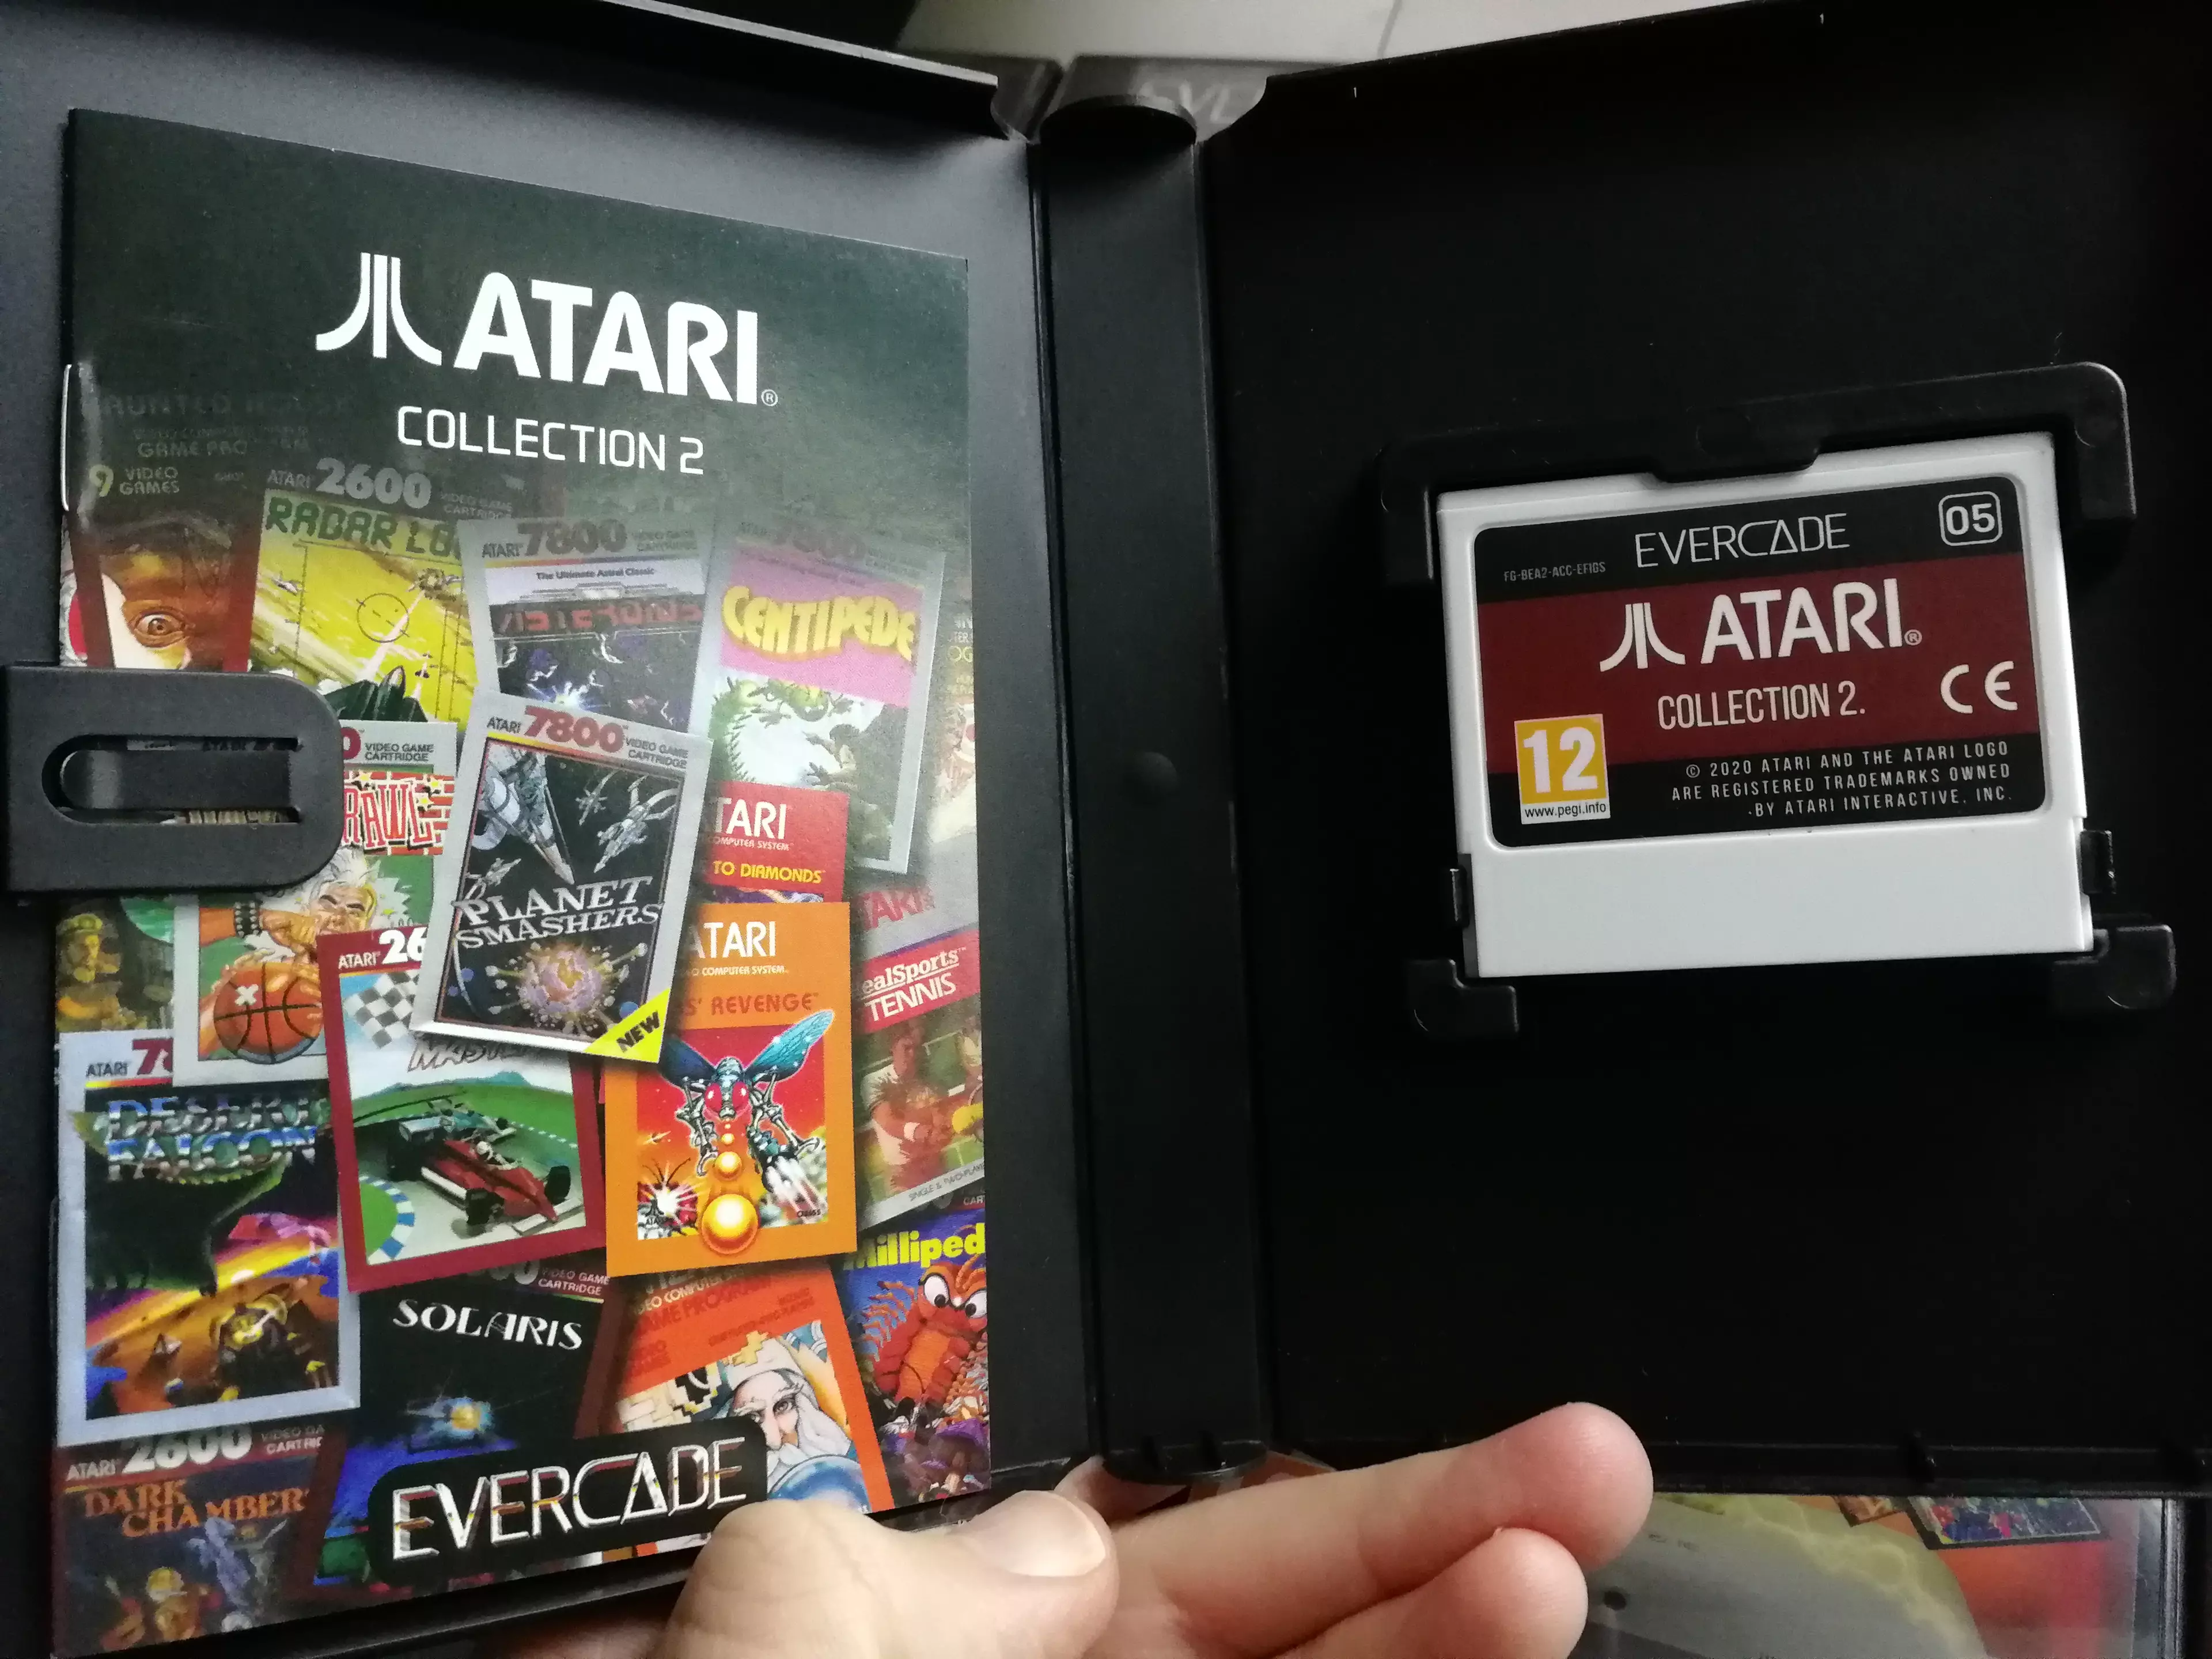 An Evercade cartridge and instruction manual /